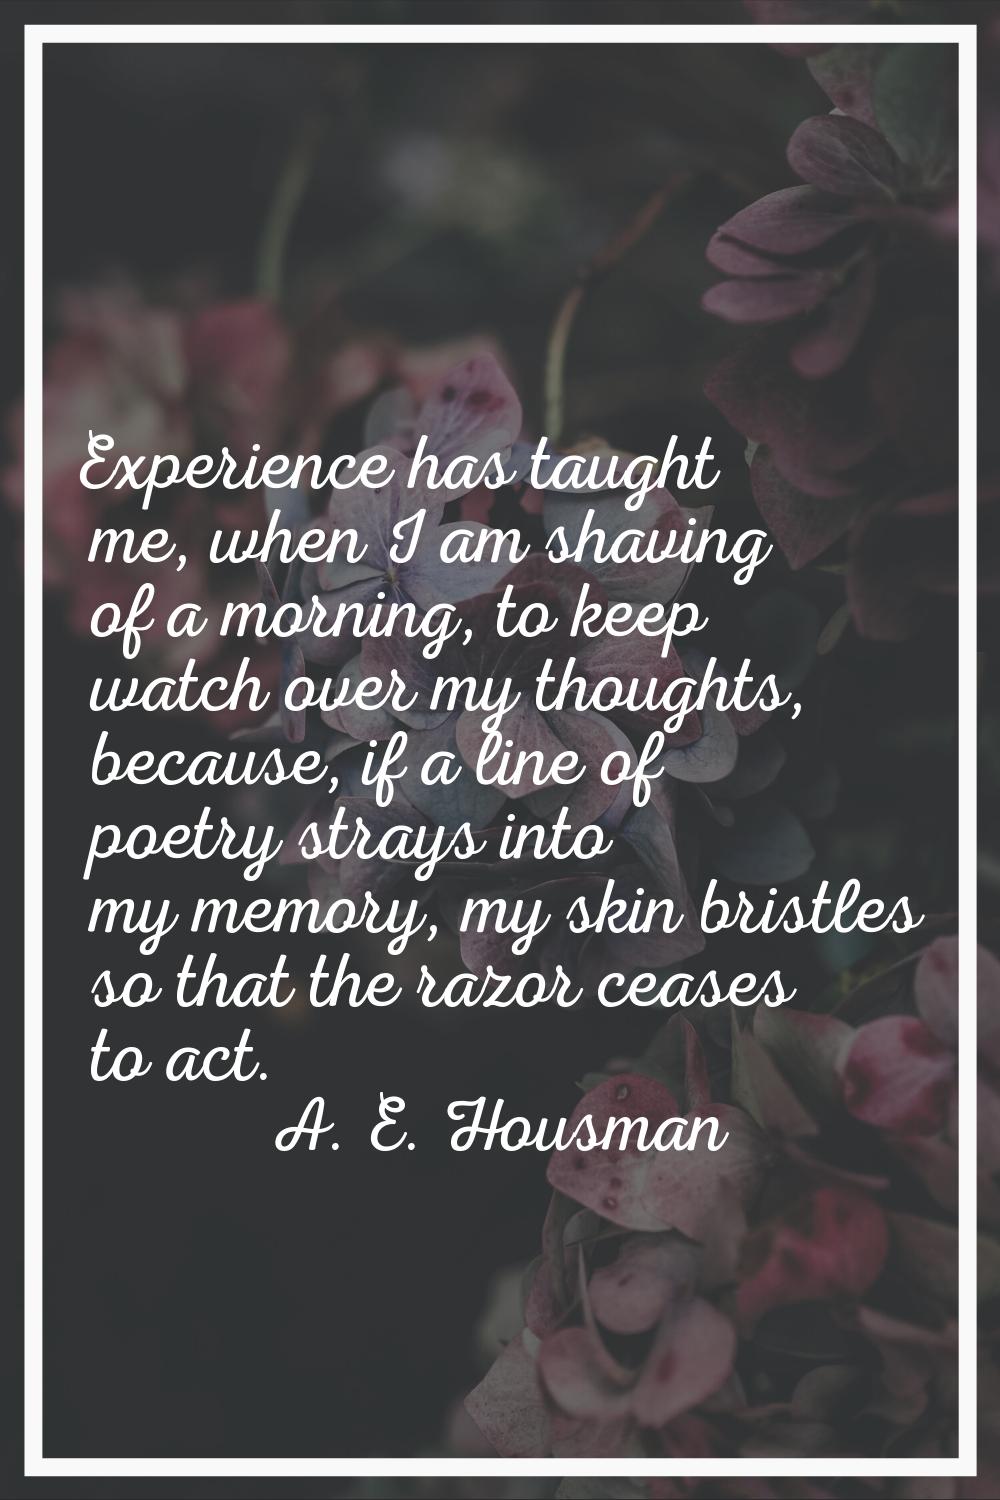 Experience has taught me, when I am shaving of a morning, to keep watch over my thoughts, because, 